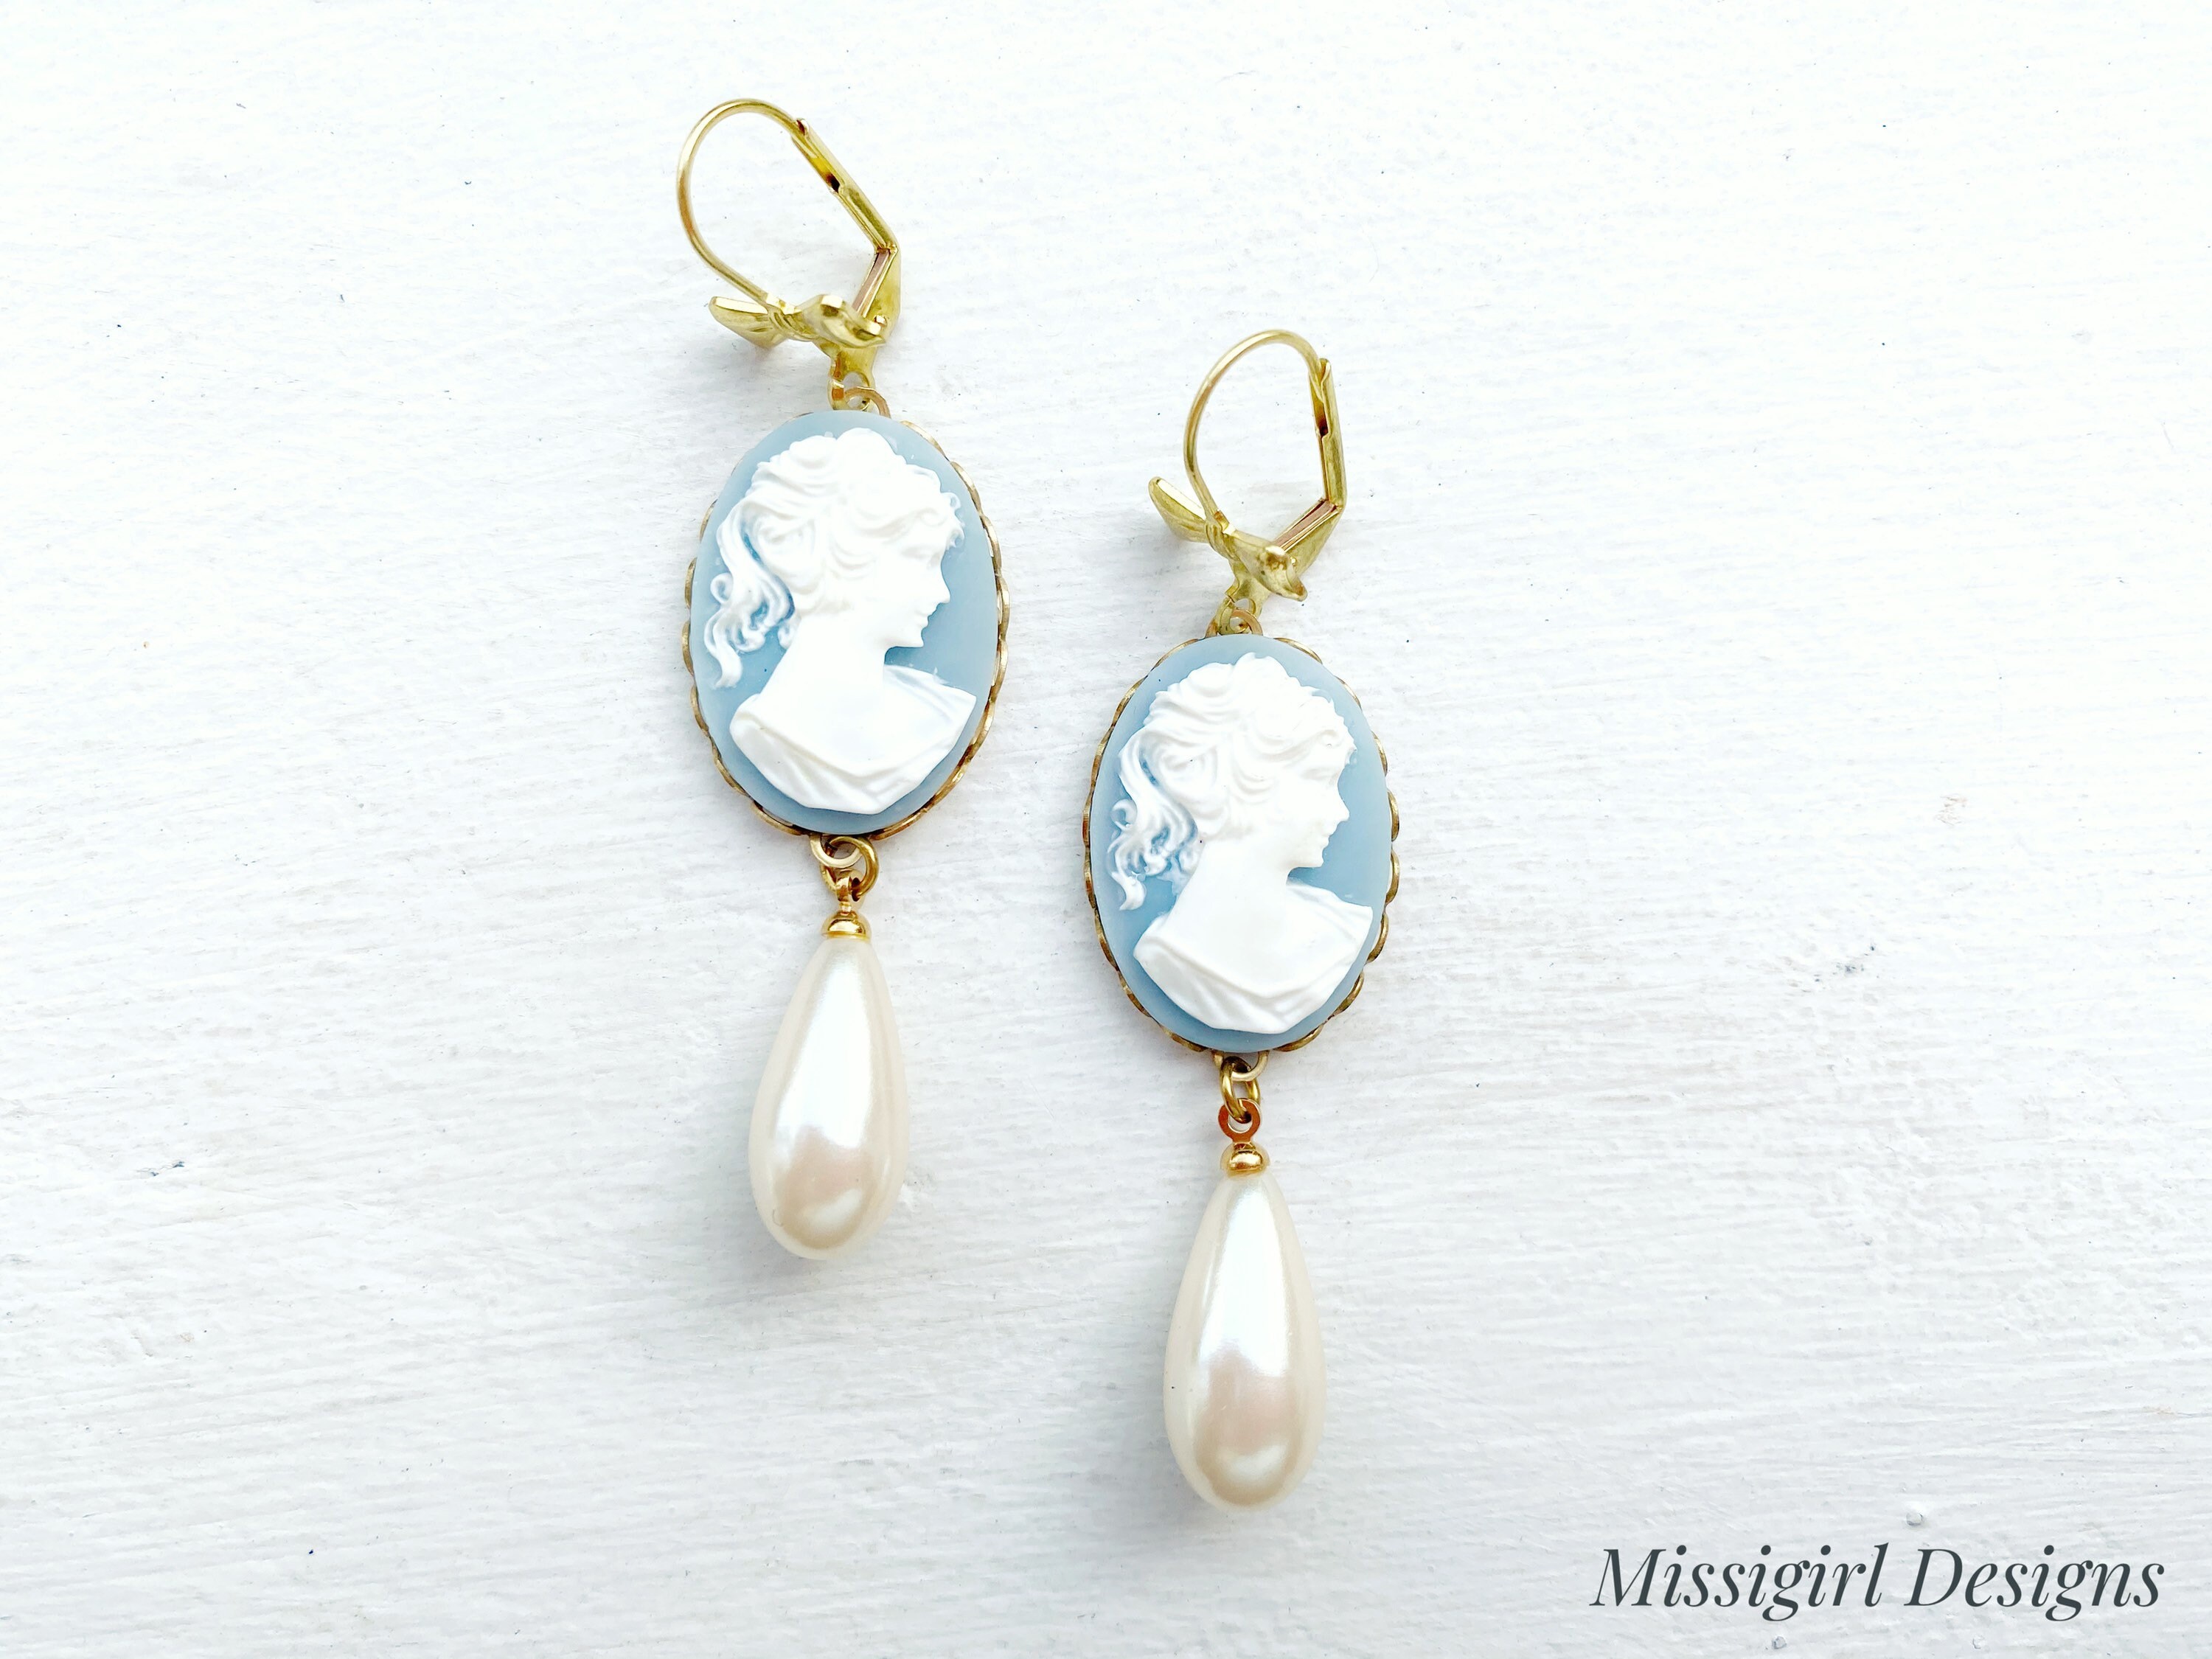 Cameo Pearl Earrings, Blue and White Cameo Earrings, Victorian Jewelry,  Romantic Vintage Style, Regency Jewelry, Pearlcore 